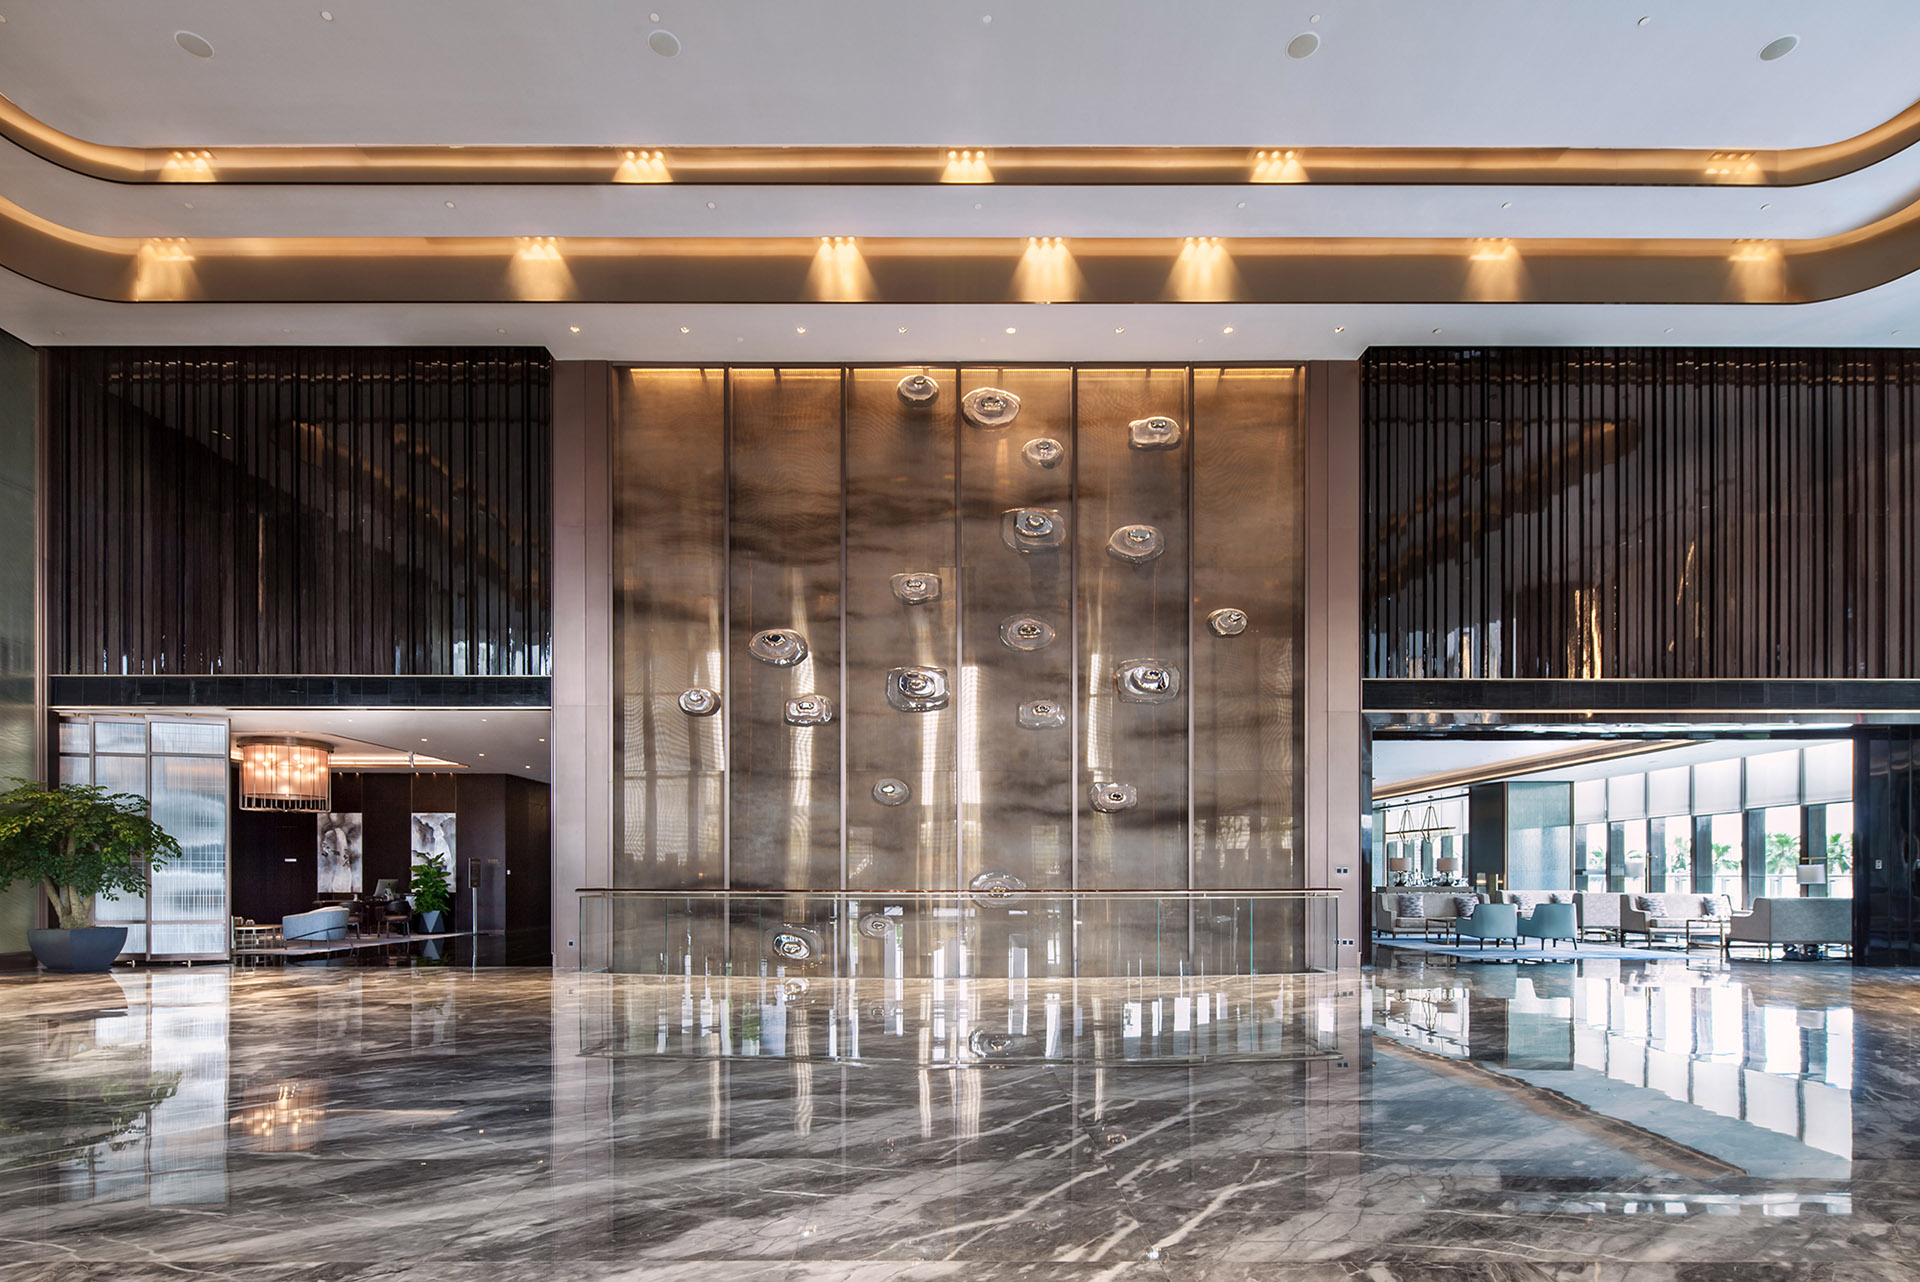 Intercontinental Hotel in Zhuhai. Design inspired by the ocean and island scenery